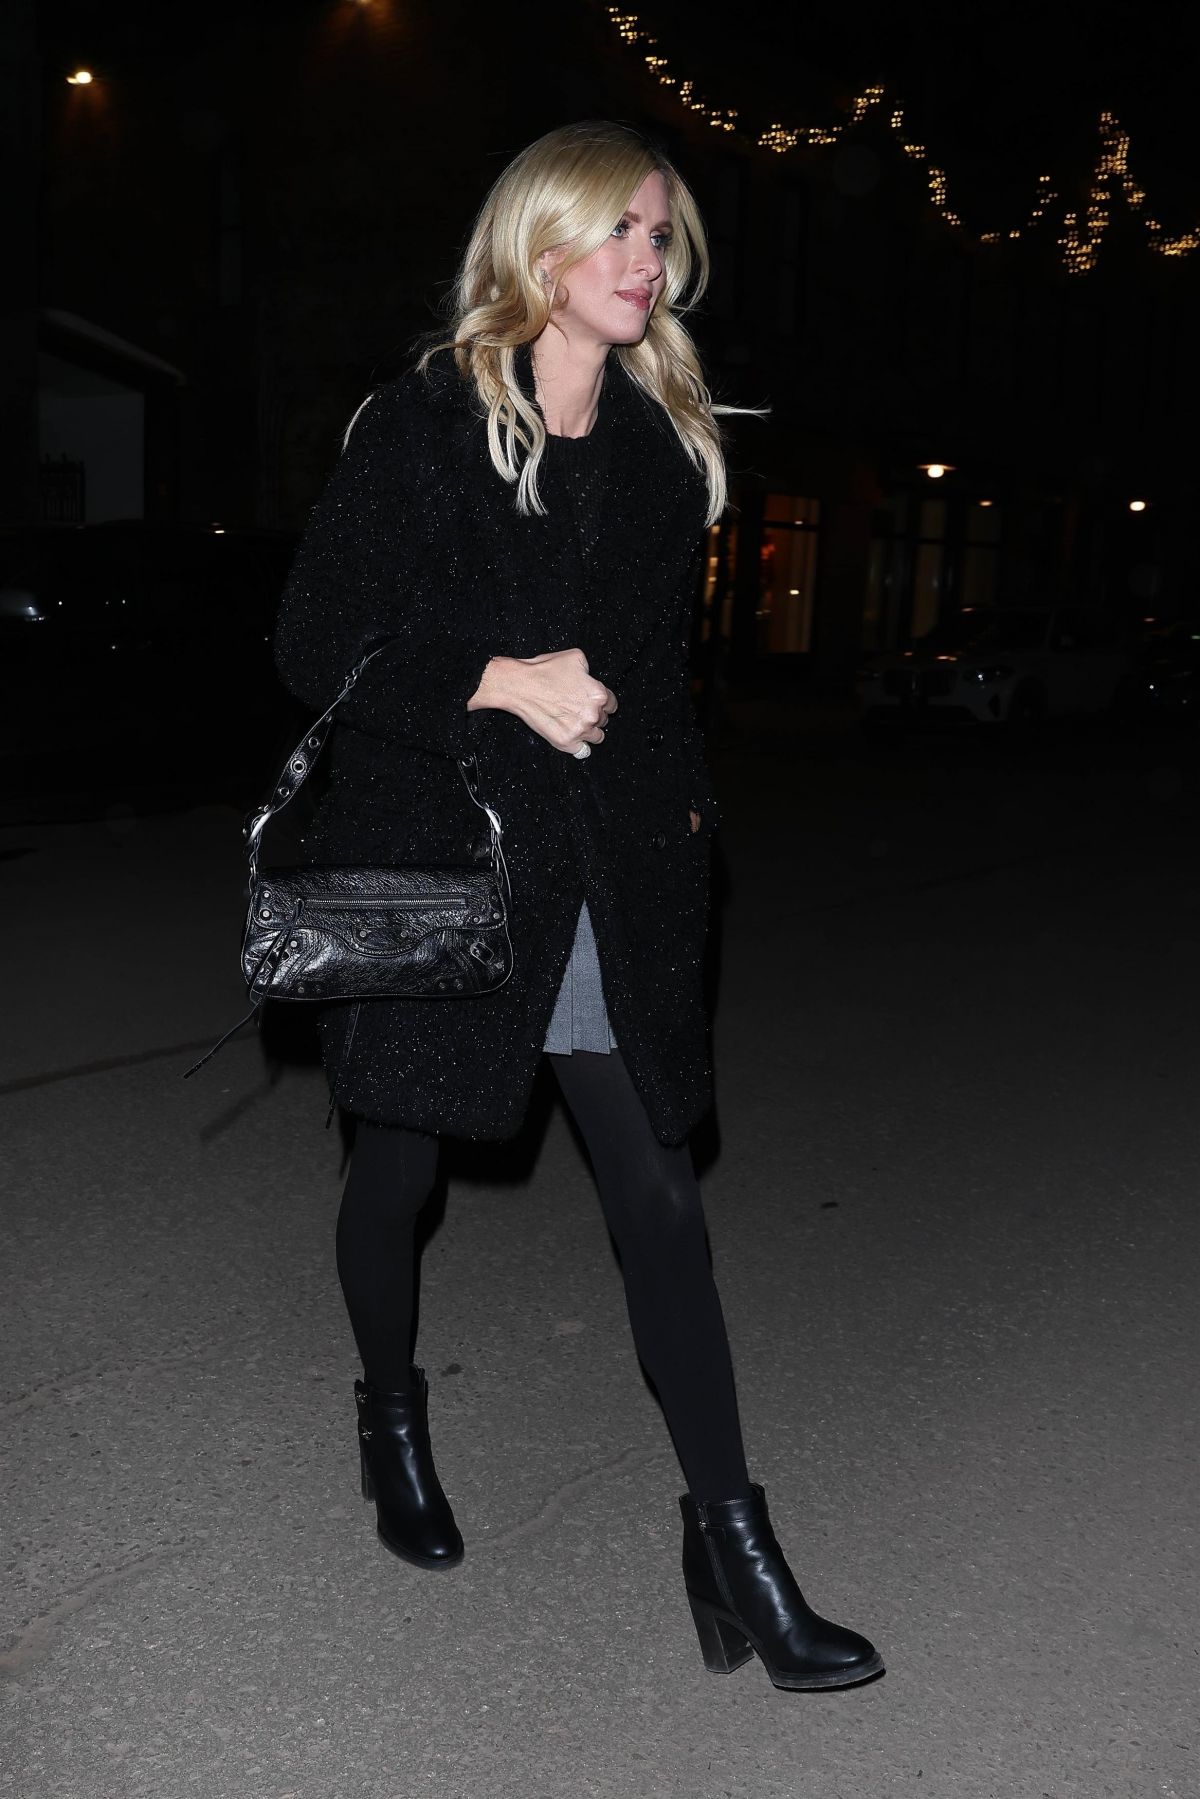 Nicky Hilton in Chic Black Outfit Leaving Kemo Sabe Aspen 3